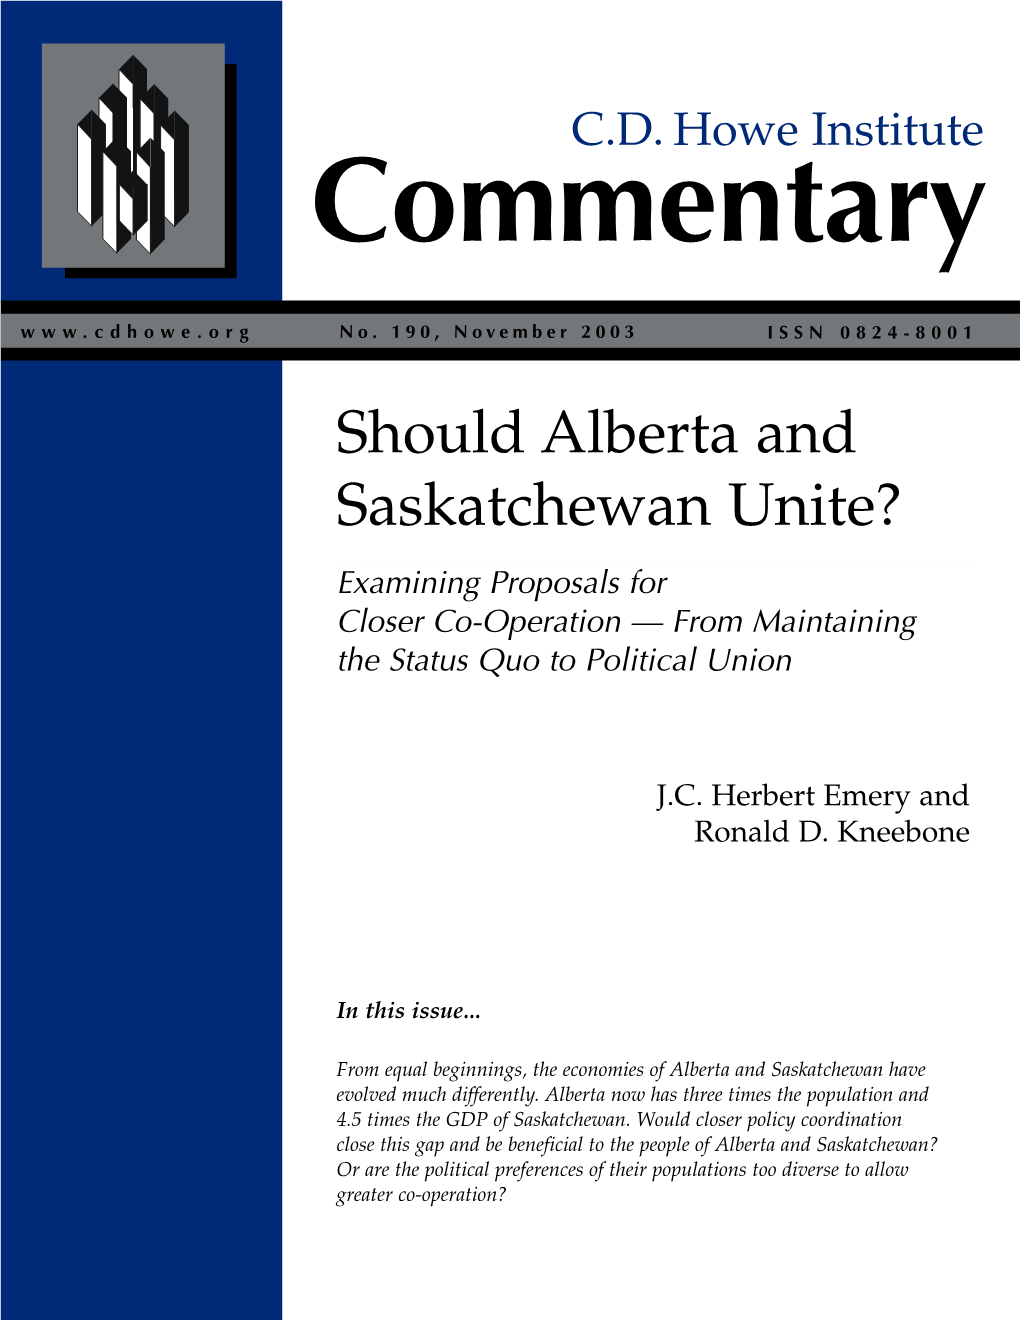 Should Alberta and Saskatchewan Unite? Examining Proposals for Closer Co-Operation — from Maintaining the Status Quo to Political Union